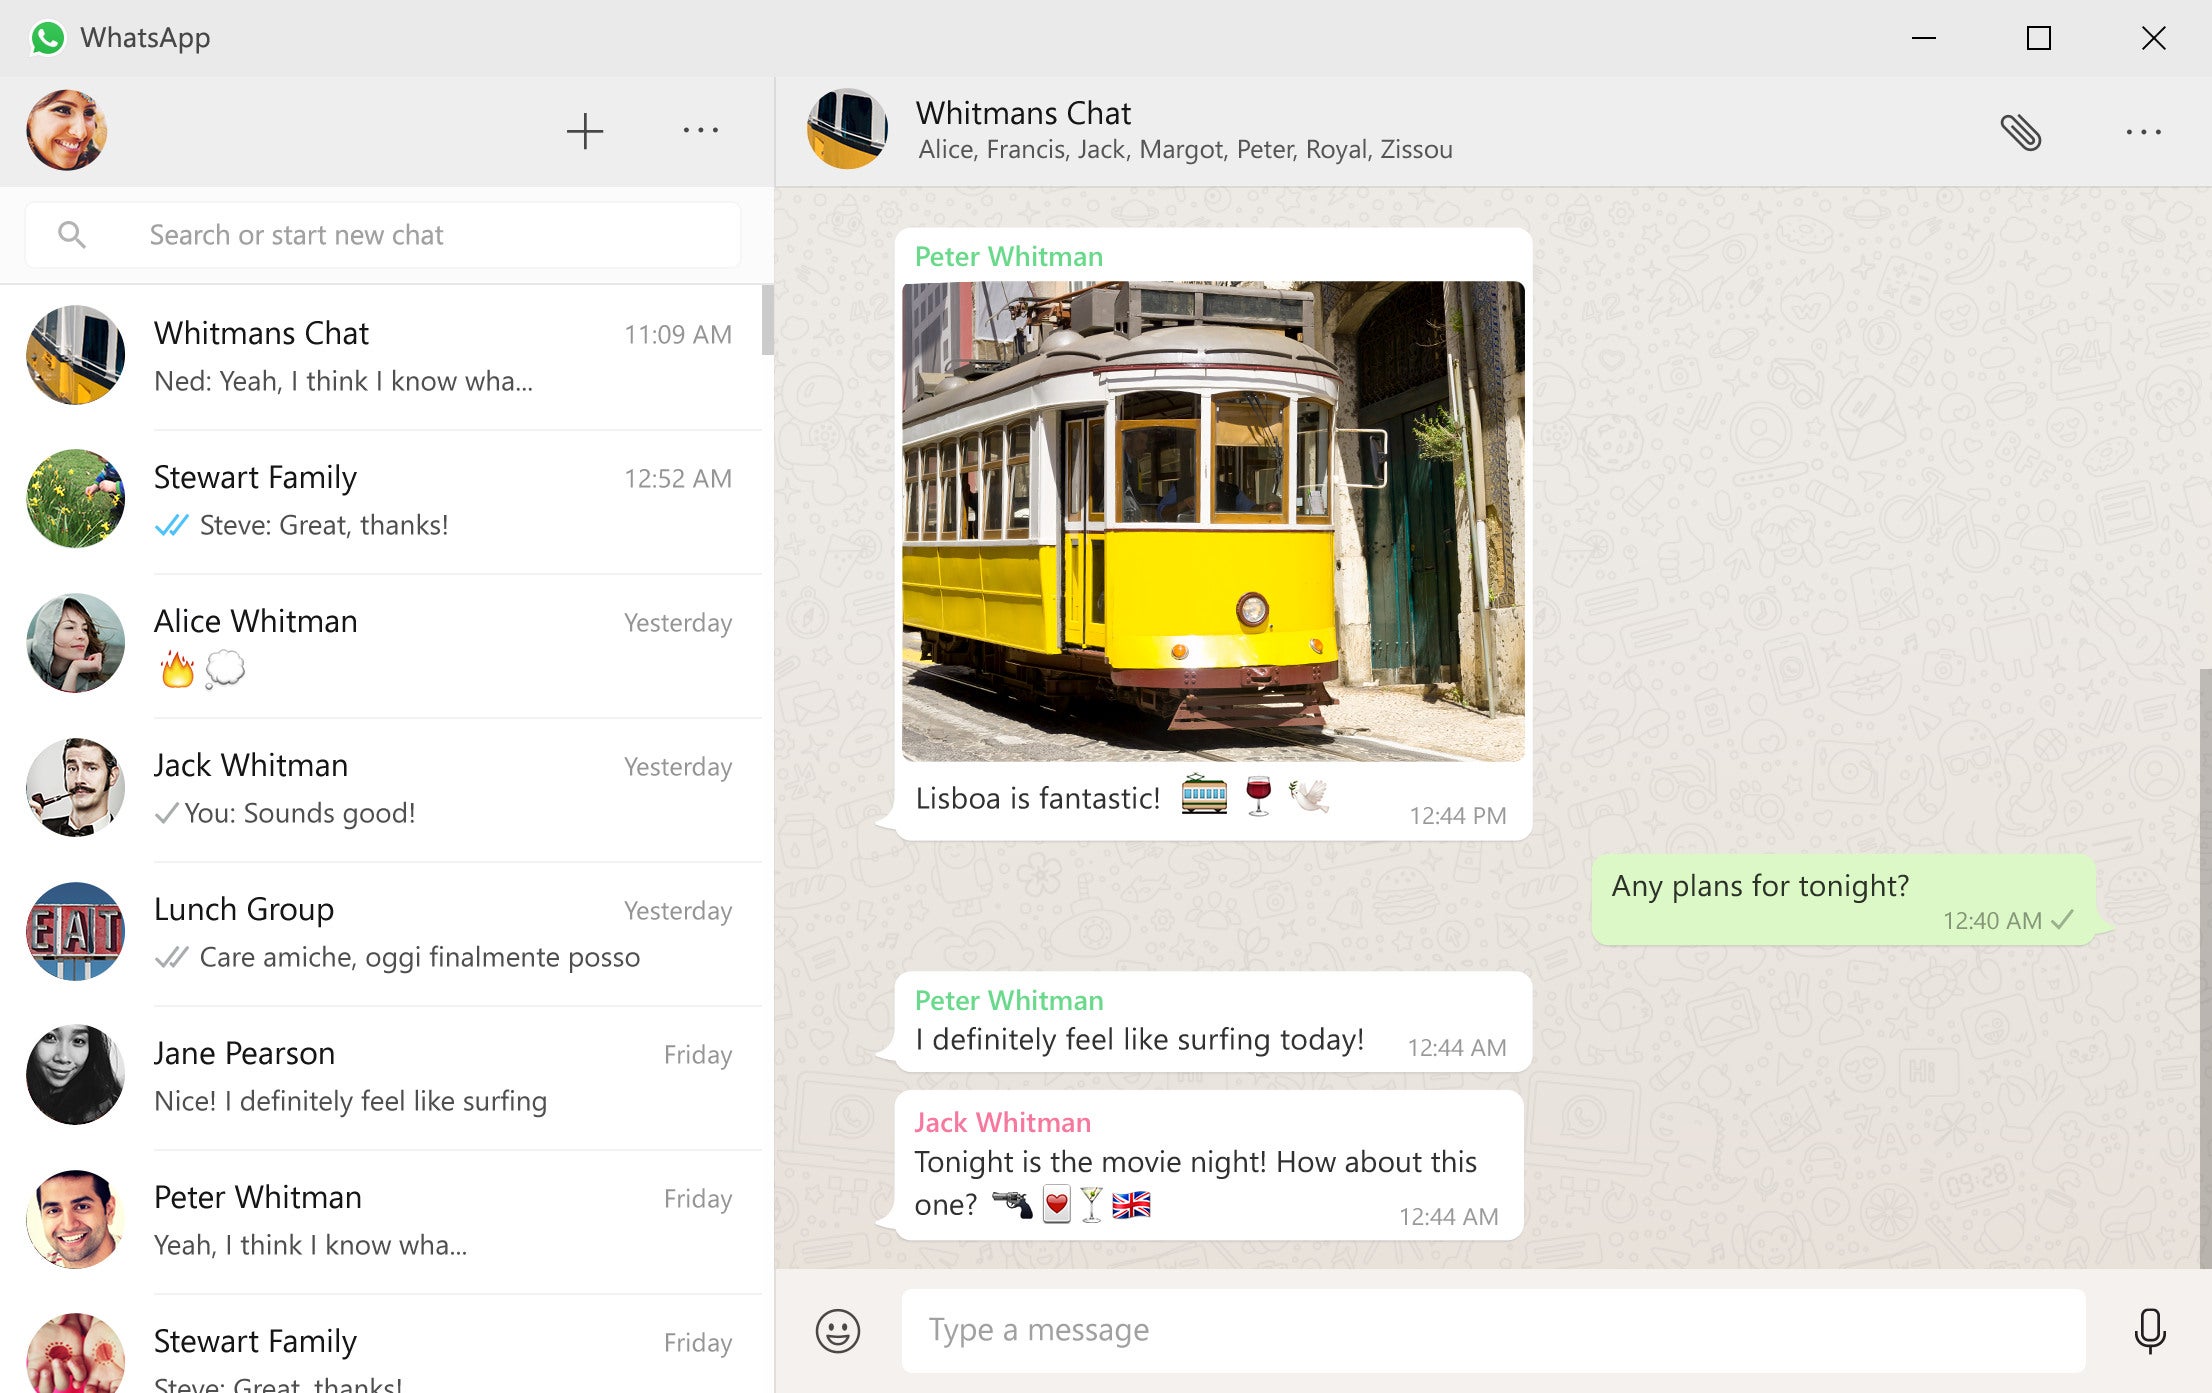 Better late than never - WhatsApp launches official desktop clients for Windows and Mac